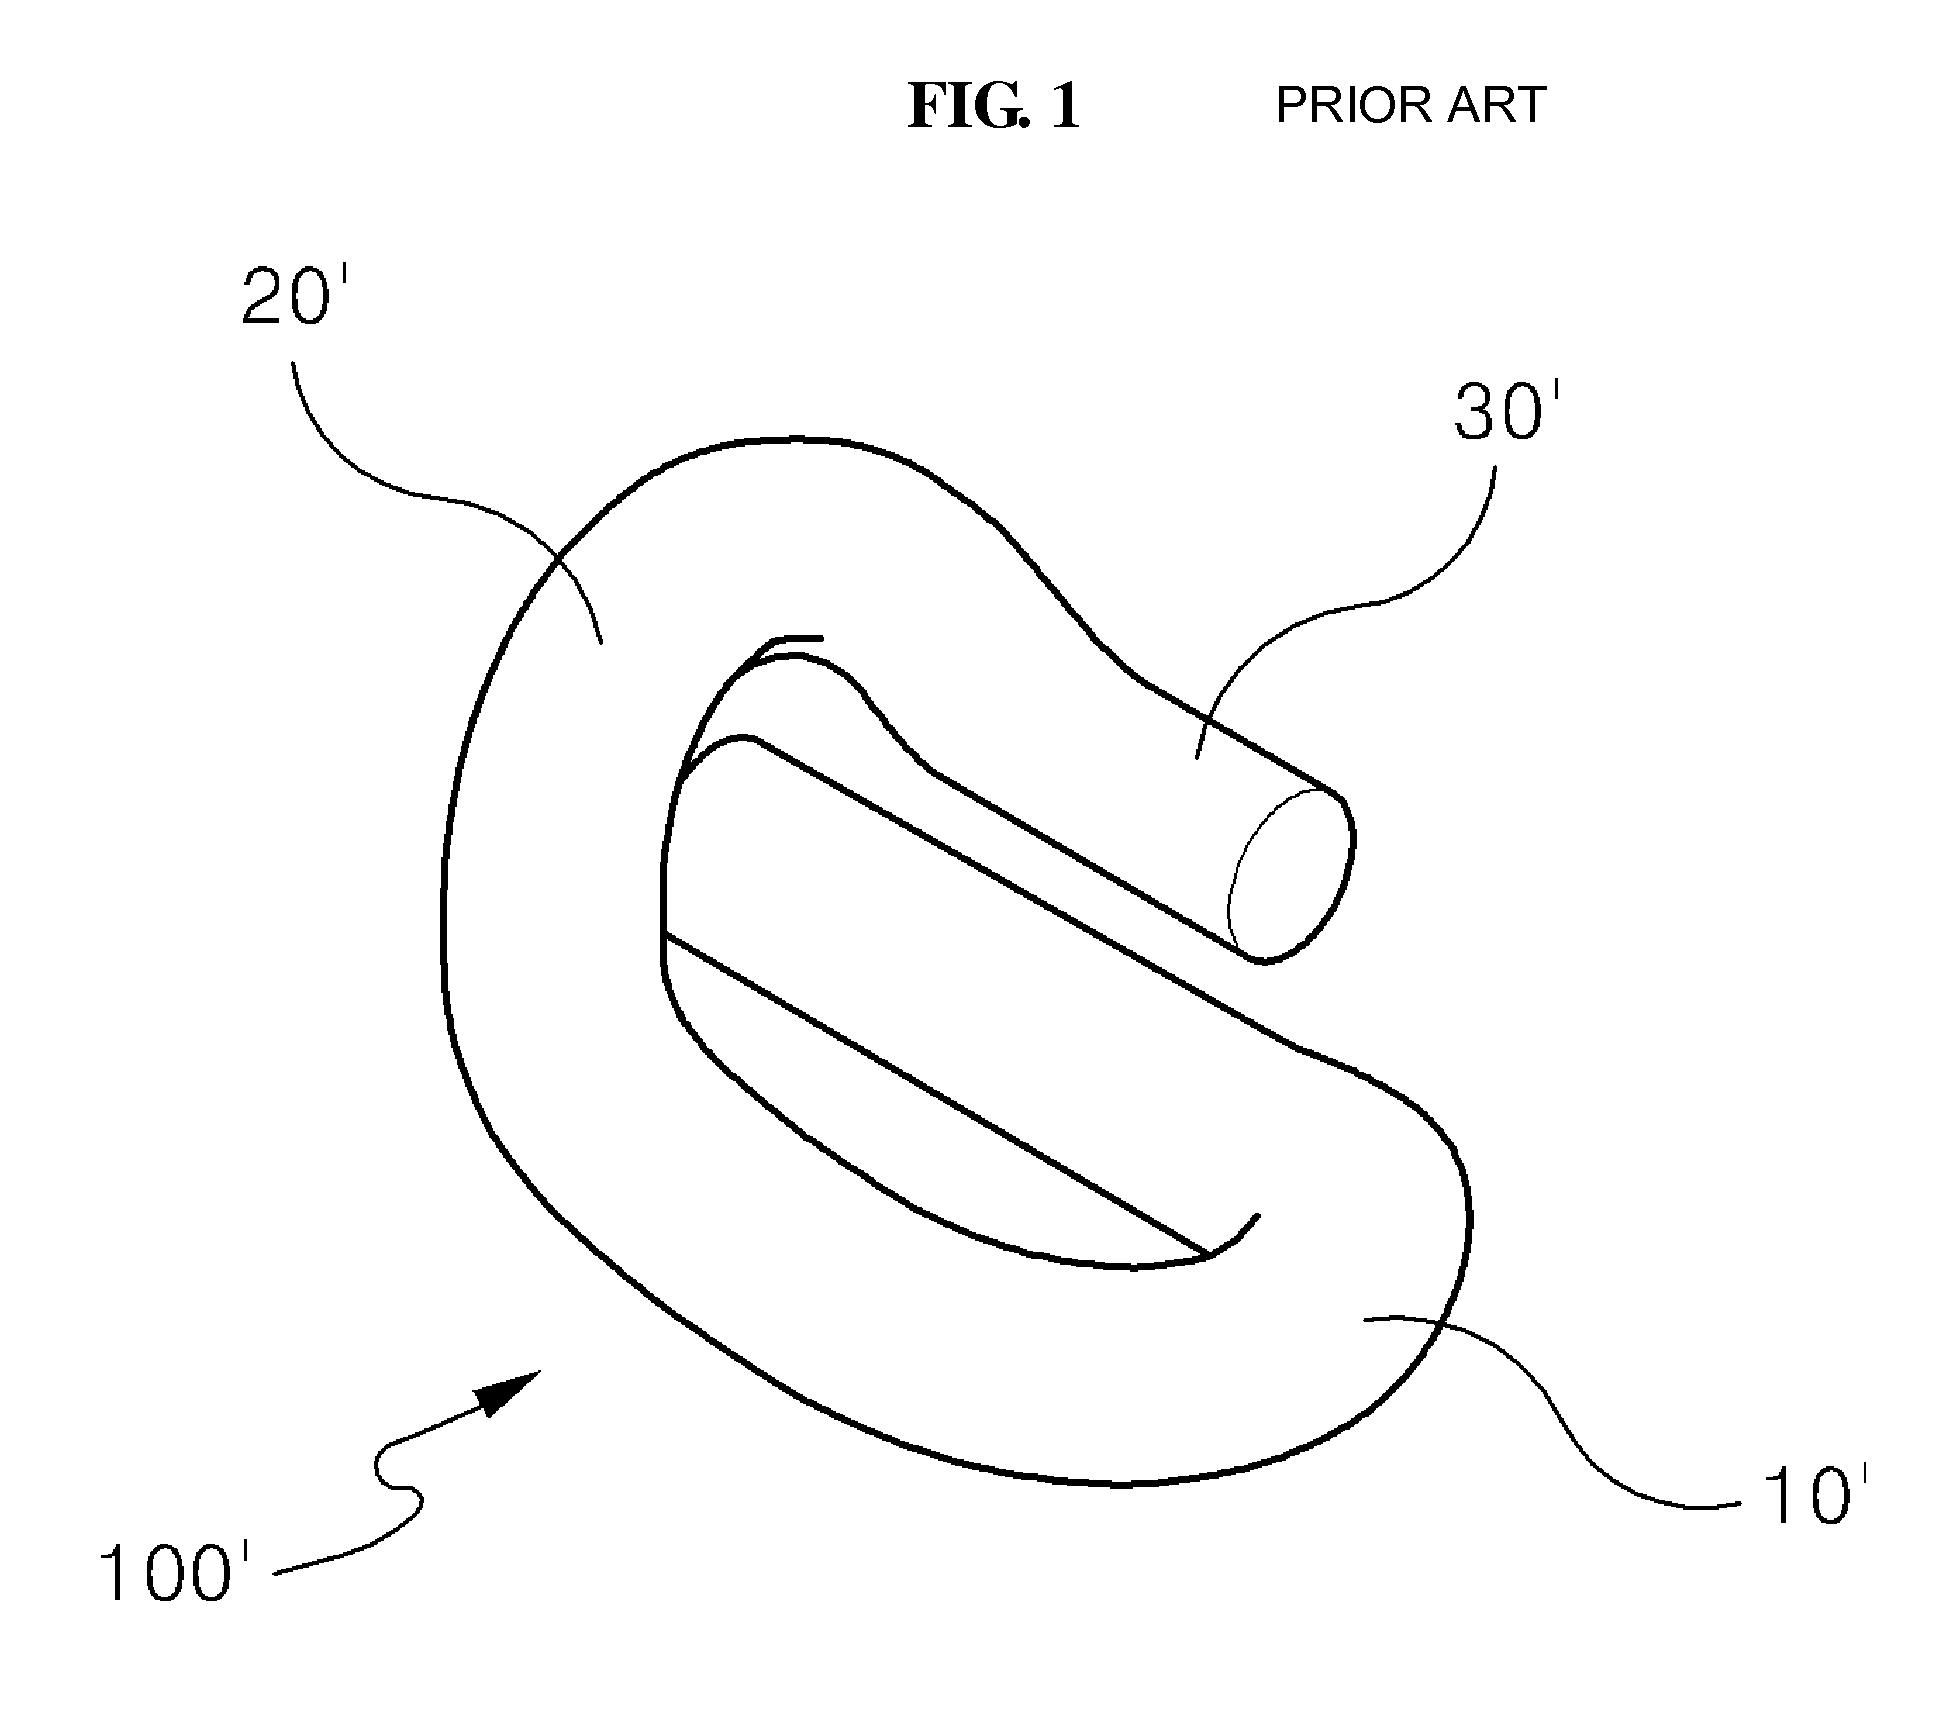 Elastic clip for fixing railway rail and method for installing the same